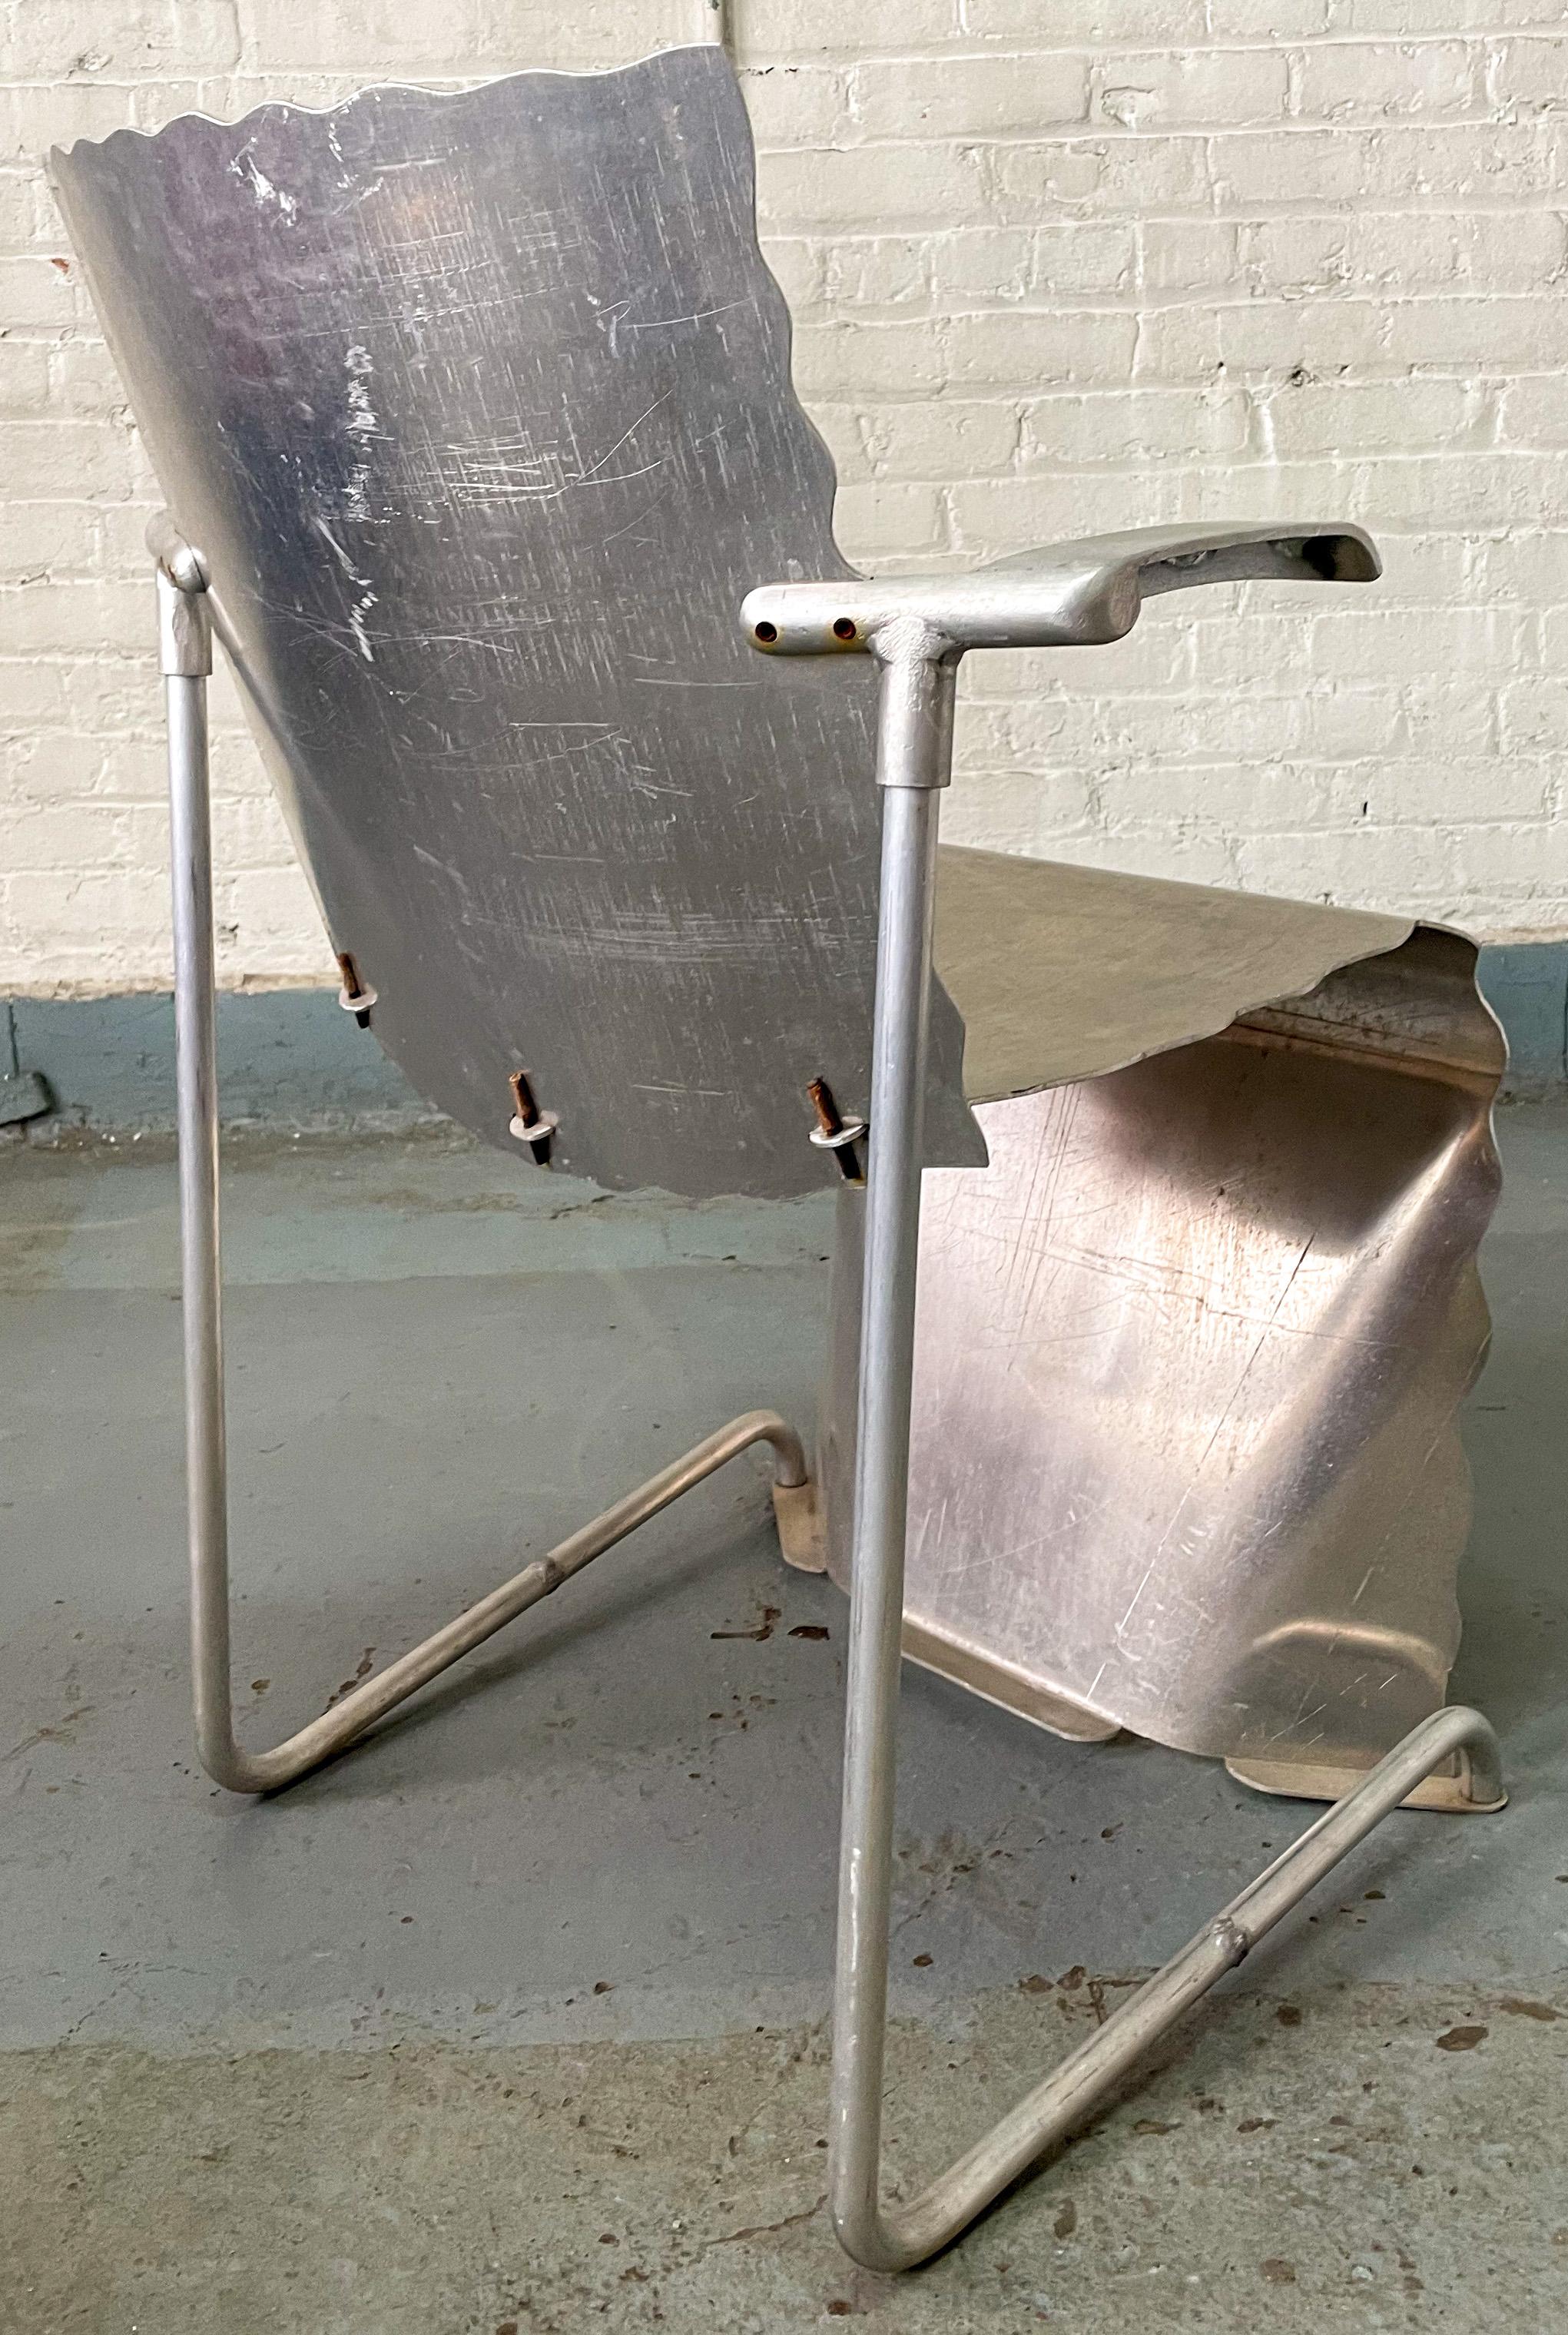 Prototype stacking chair hand-built of aluminum by furniture designer and artist Richard Schultz as a full-size 3-D model exploring the ergonomic and sculptural qualities of a design in which the seat is formed as a continuous ribbon of sheet metal,